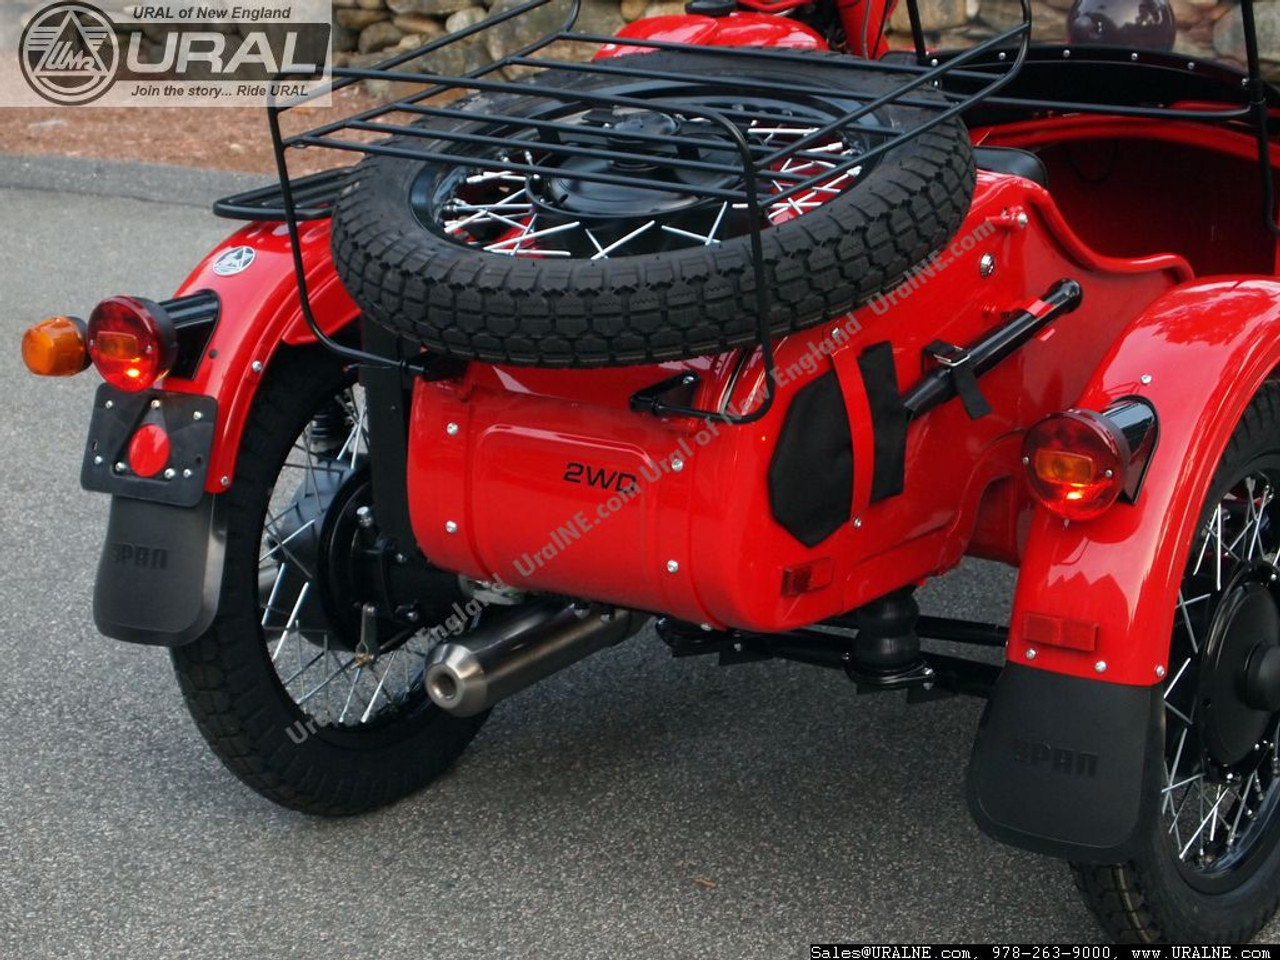 2012 Ural Gear-Up Red-Black Custom 2WD with Retro Lighting